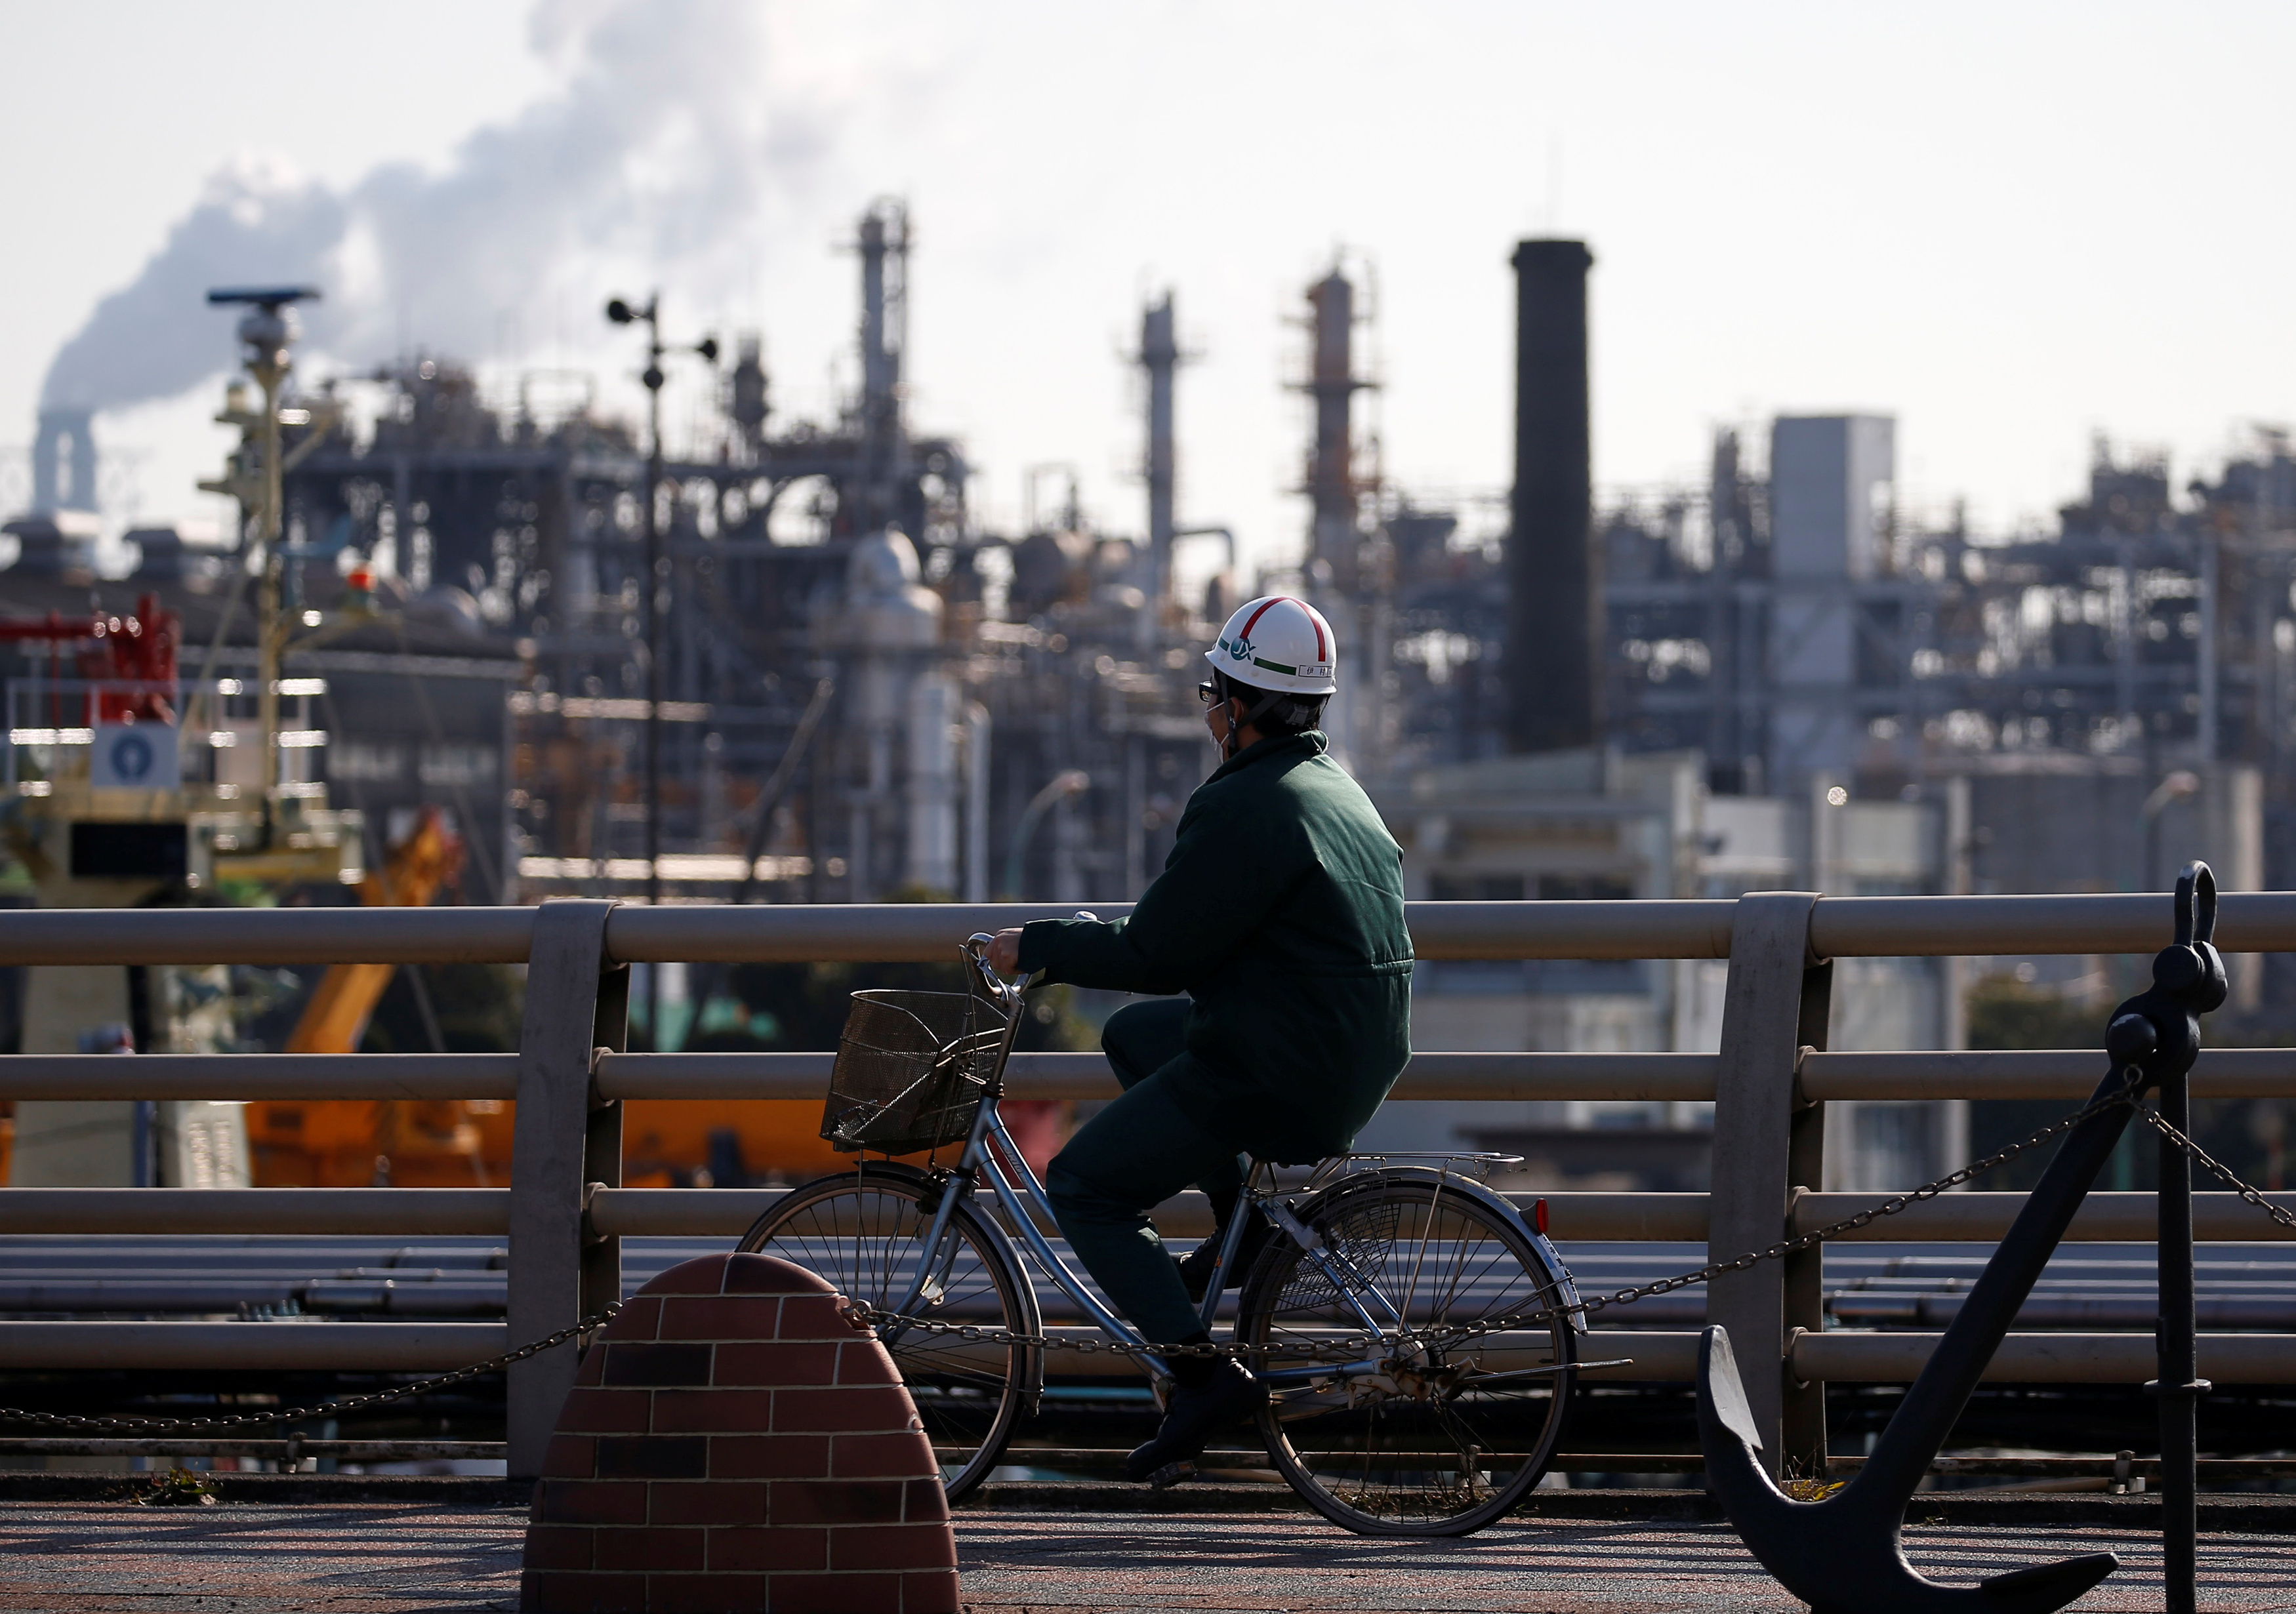 A worker cycles near a factory at the Keihin industrial zone in Kawasaki